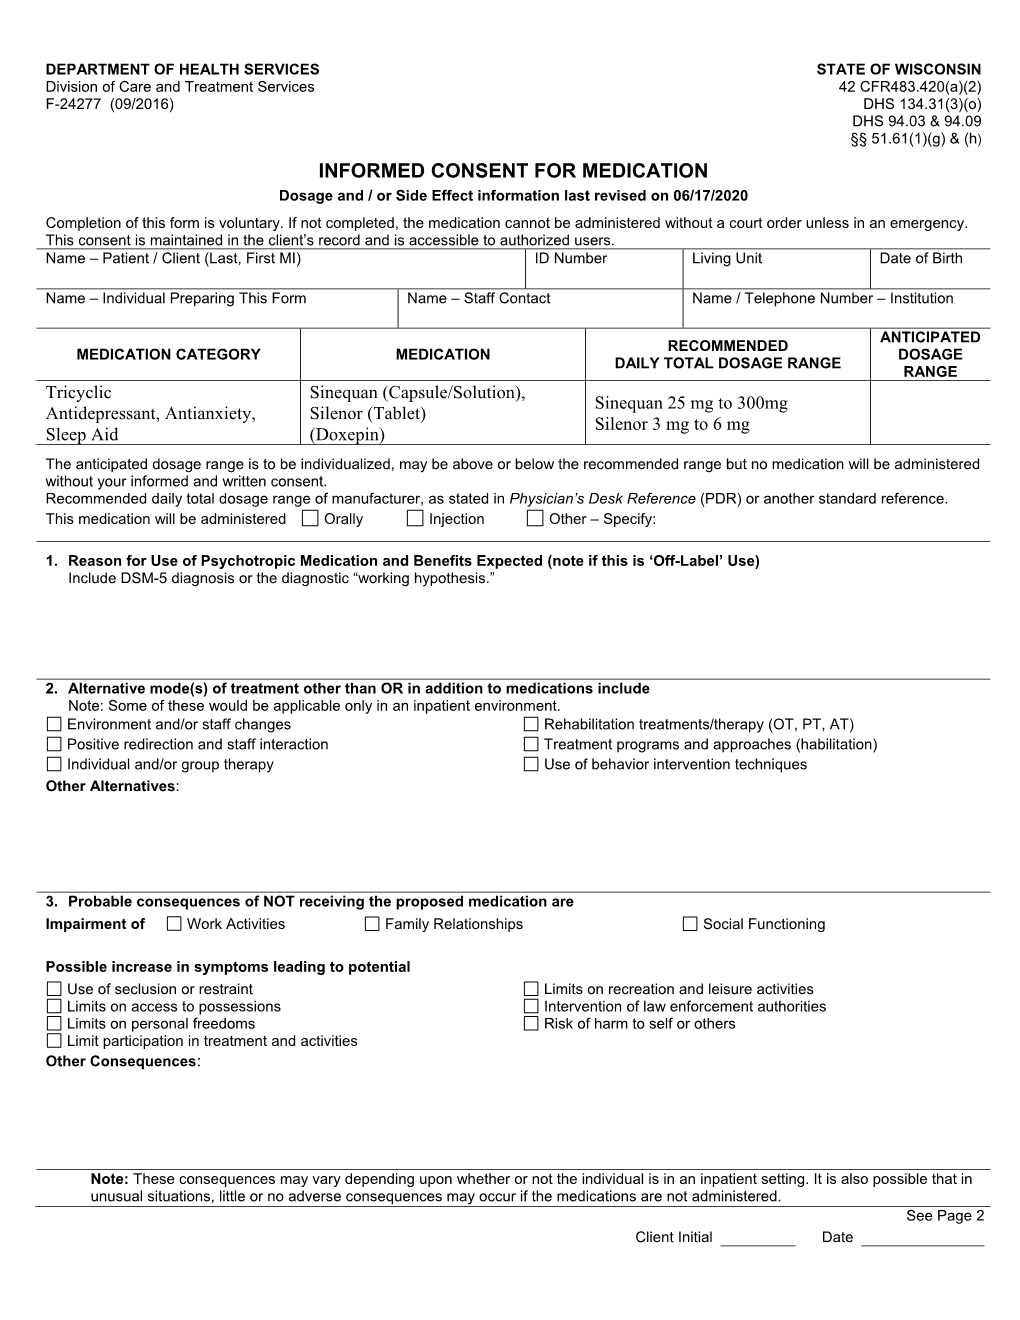 INFORMED CONSENT for MEDICATION Dosage and / Or Side Effect Information Last Revised on 06/17/2020 Completion of This Form Is Voluntary